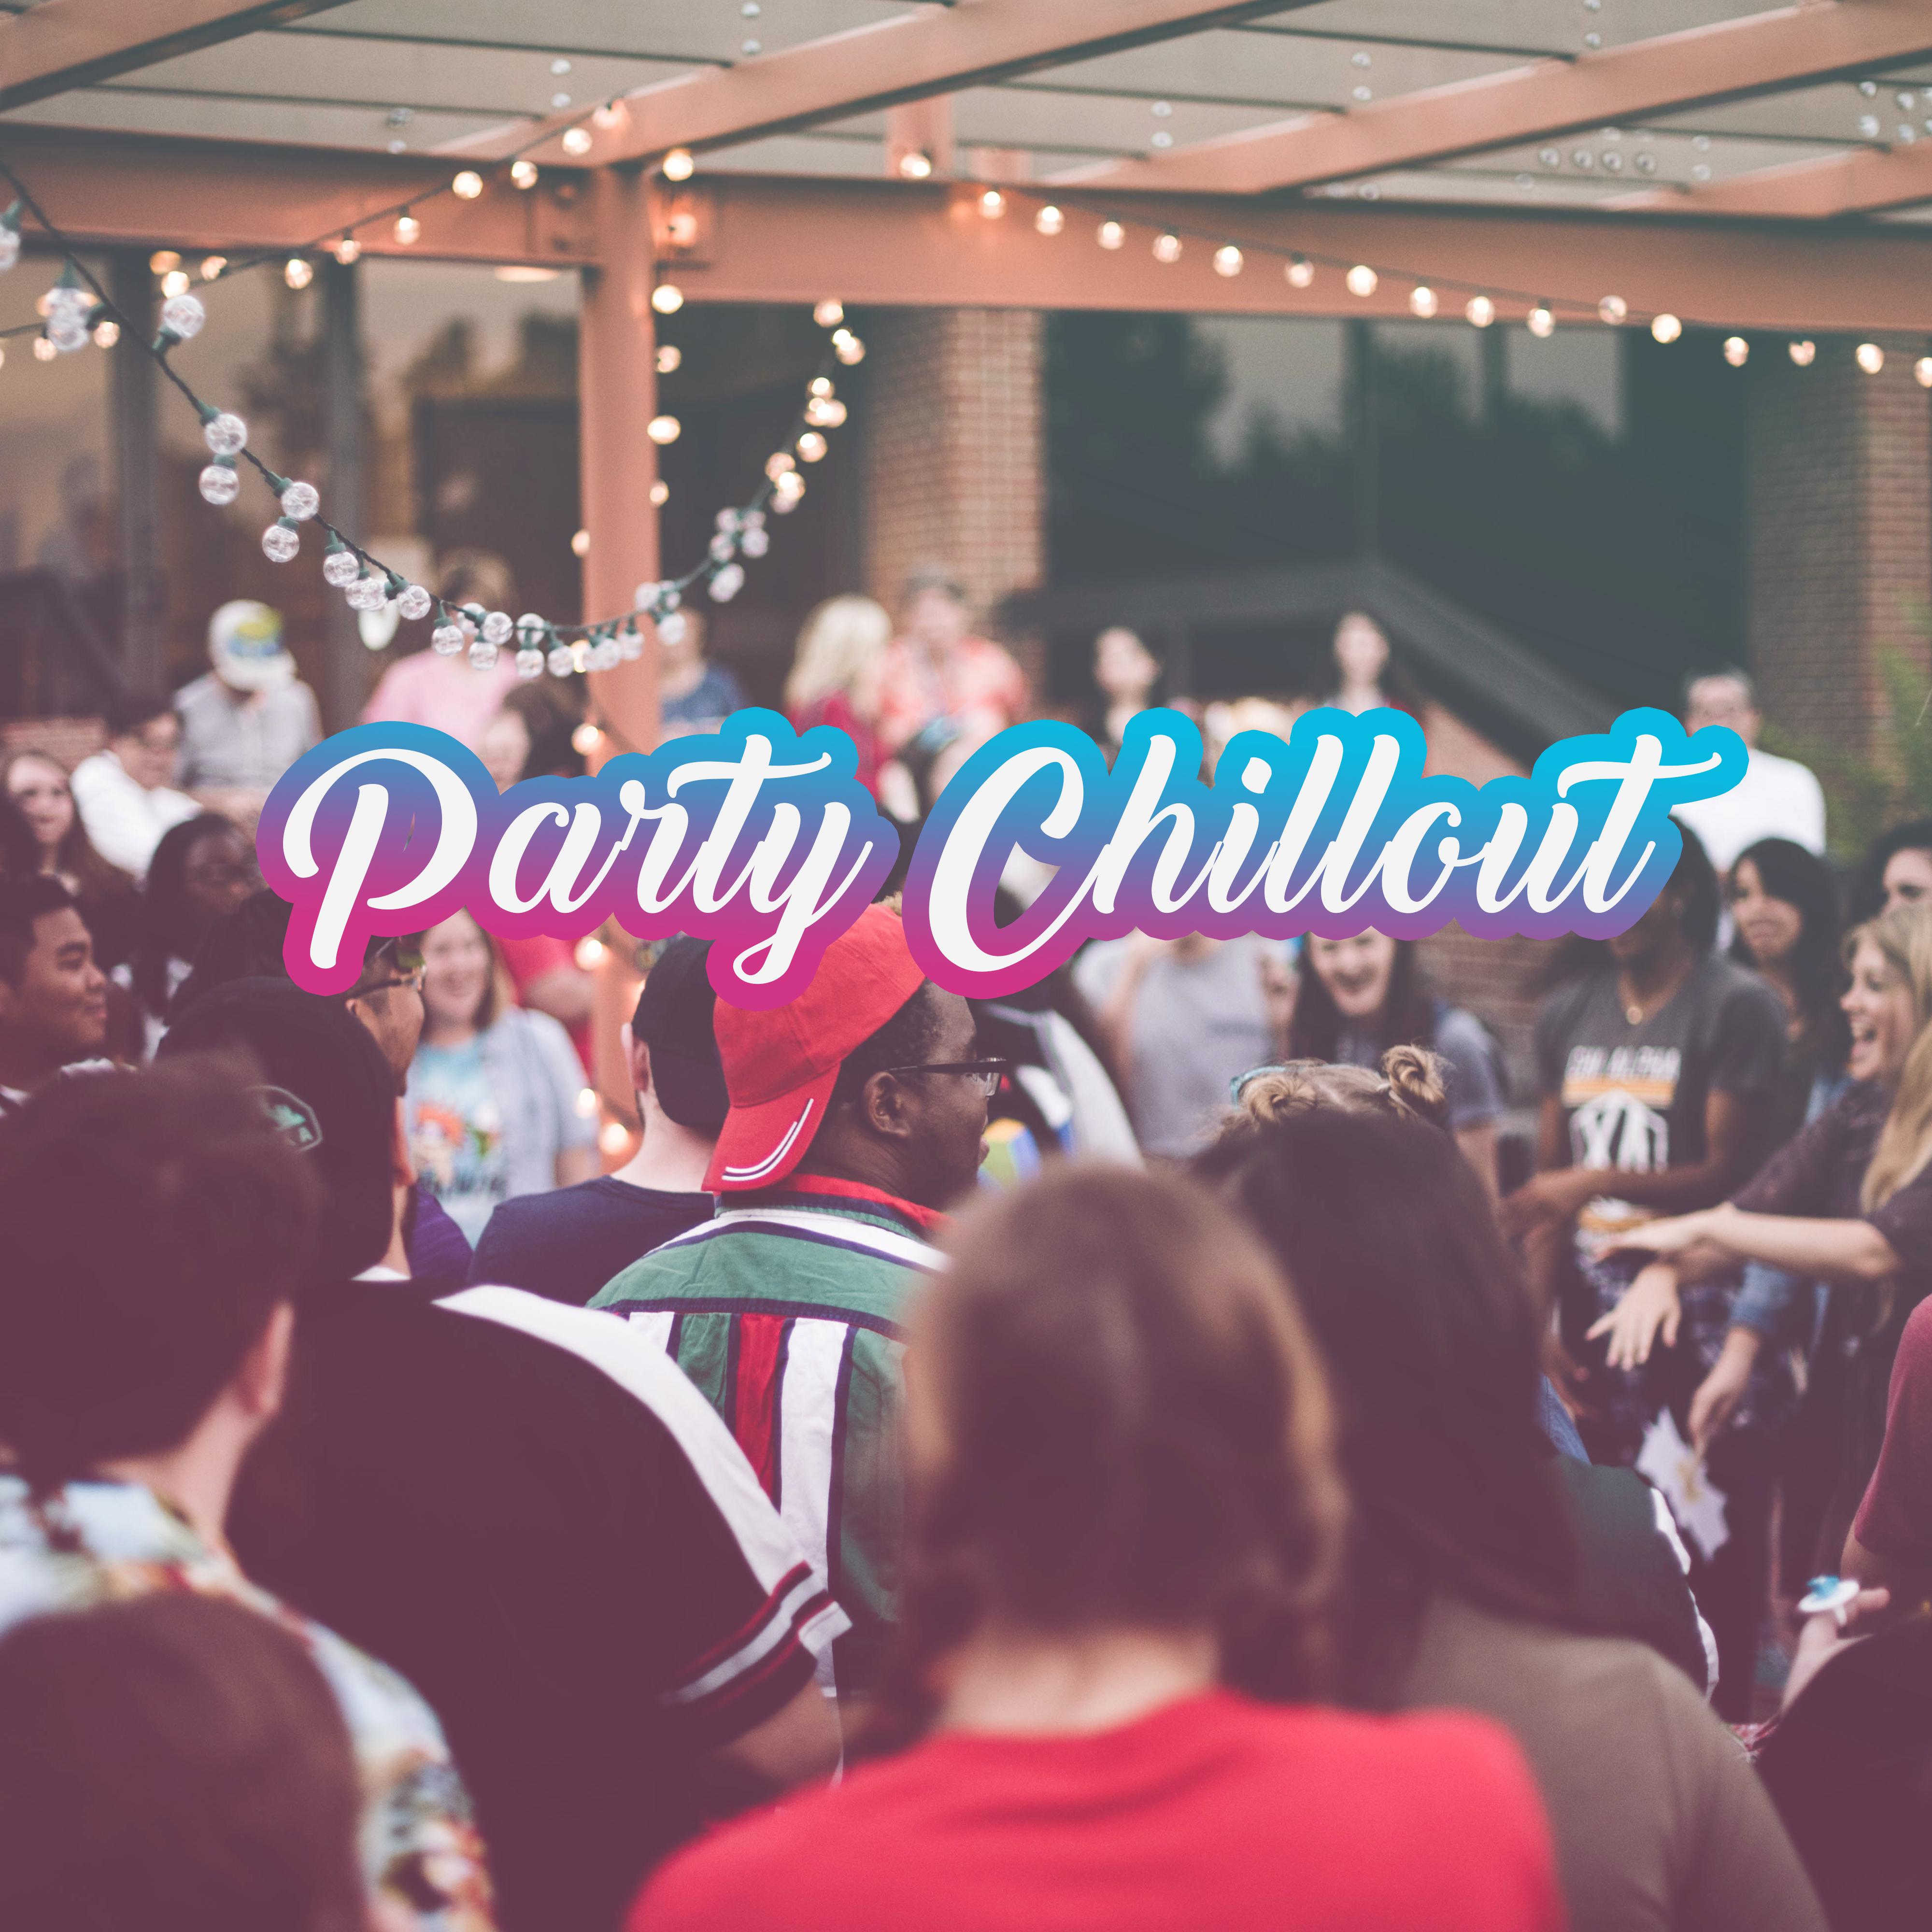 Party Chillout – Relaxing Vibes to Relax, Unwind and Calm Down at the Party